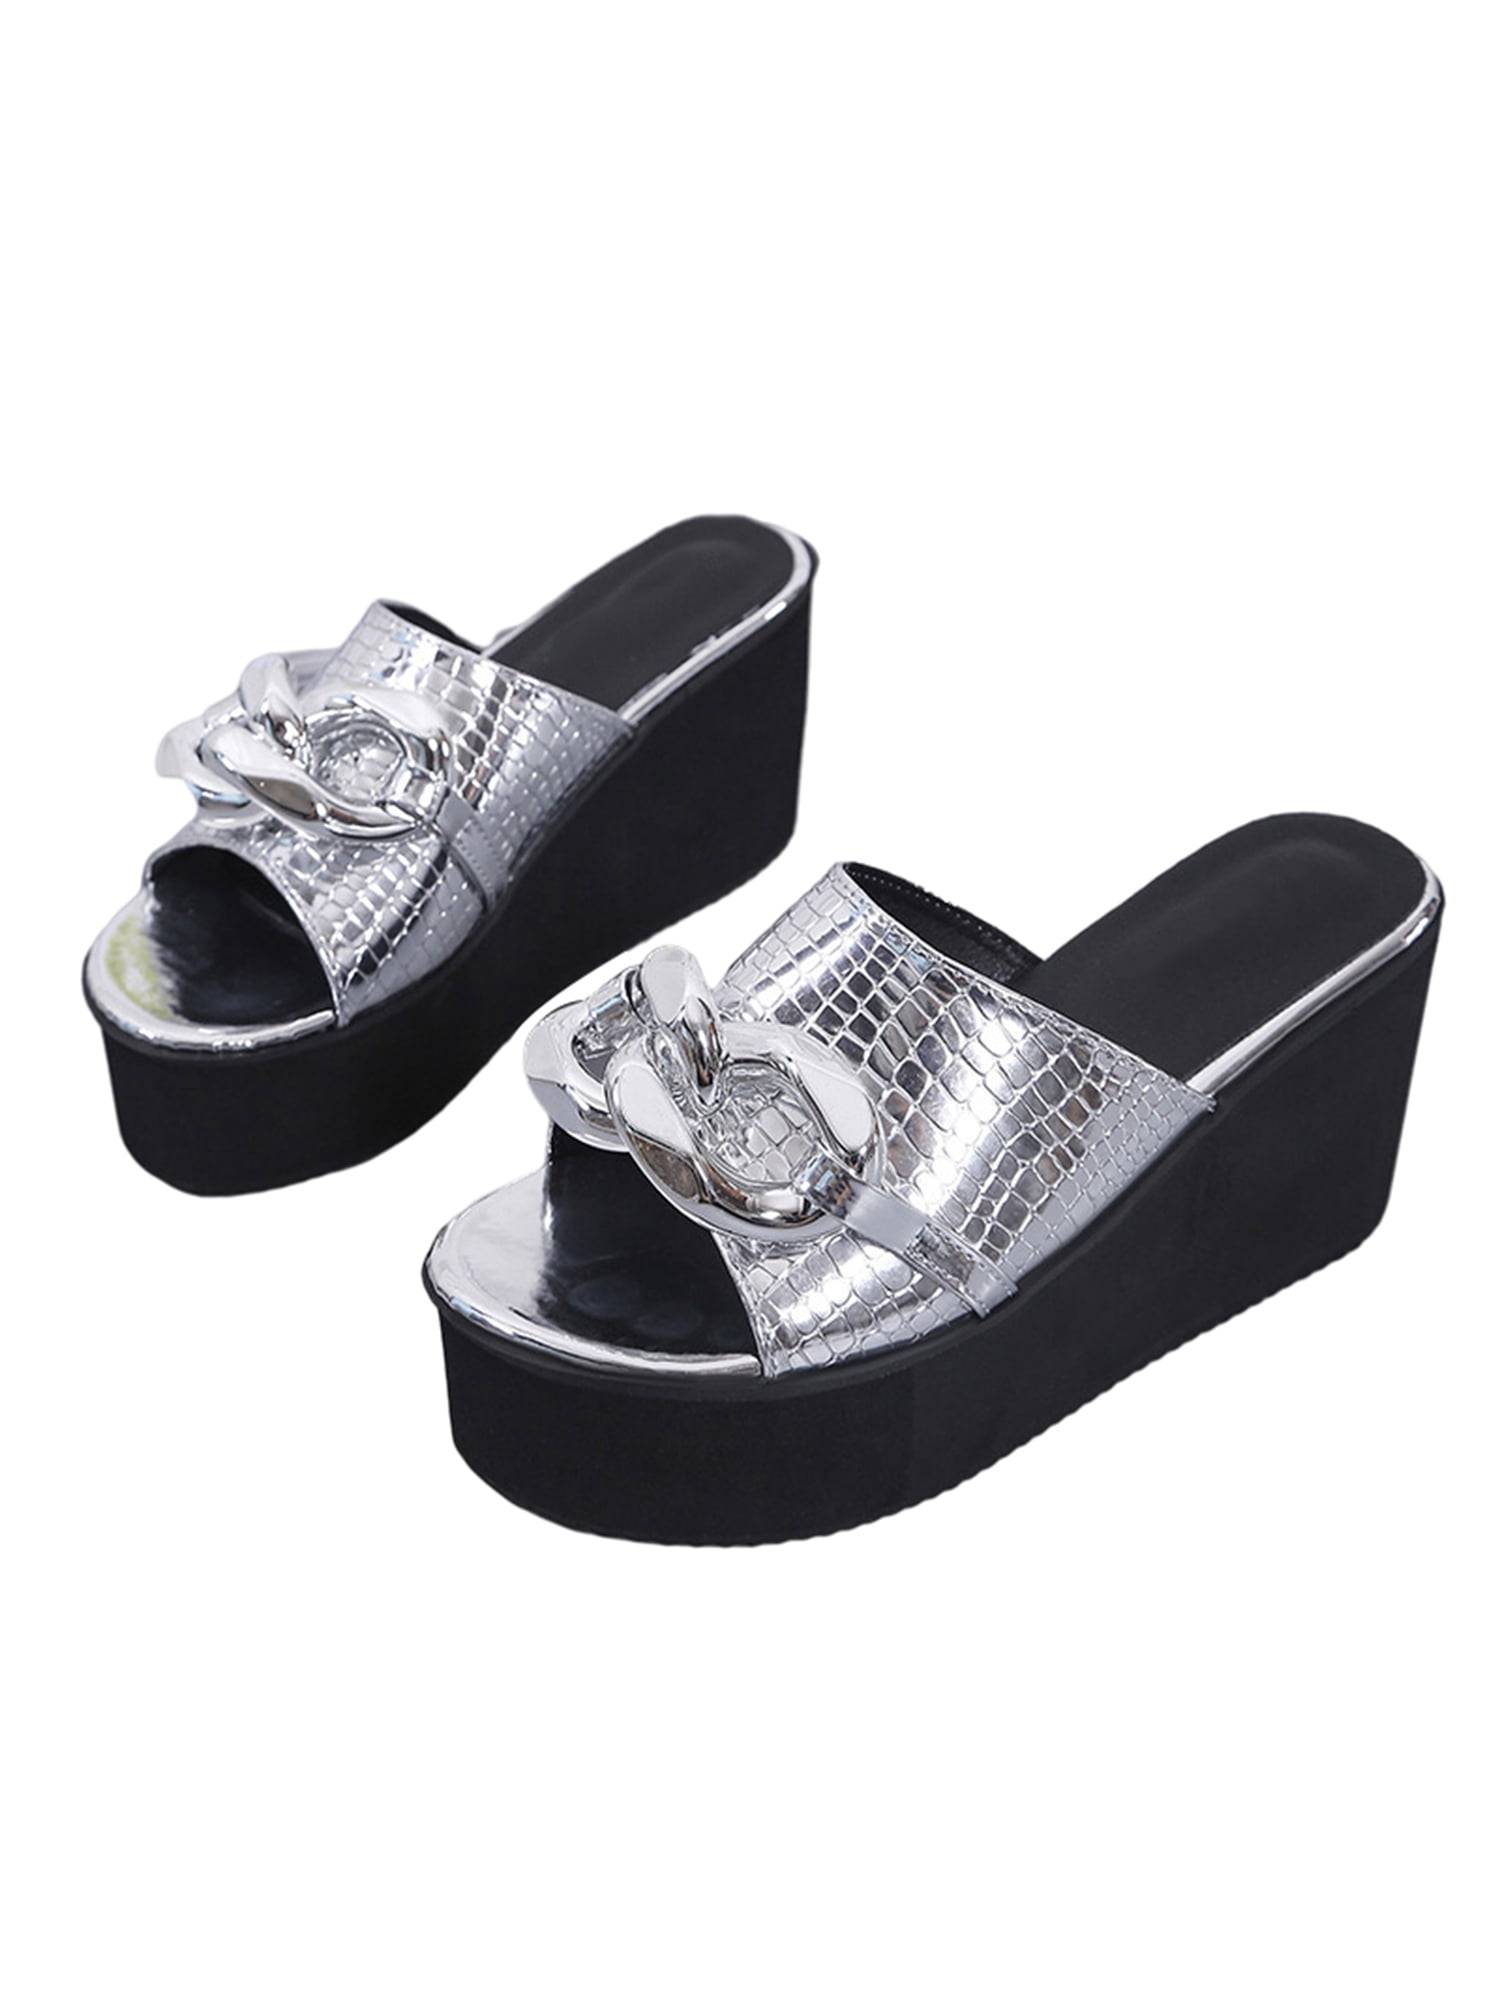 Holiday Sandals Ladies Shoes Womens Casual Slip On Mule Wedge Summer 